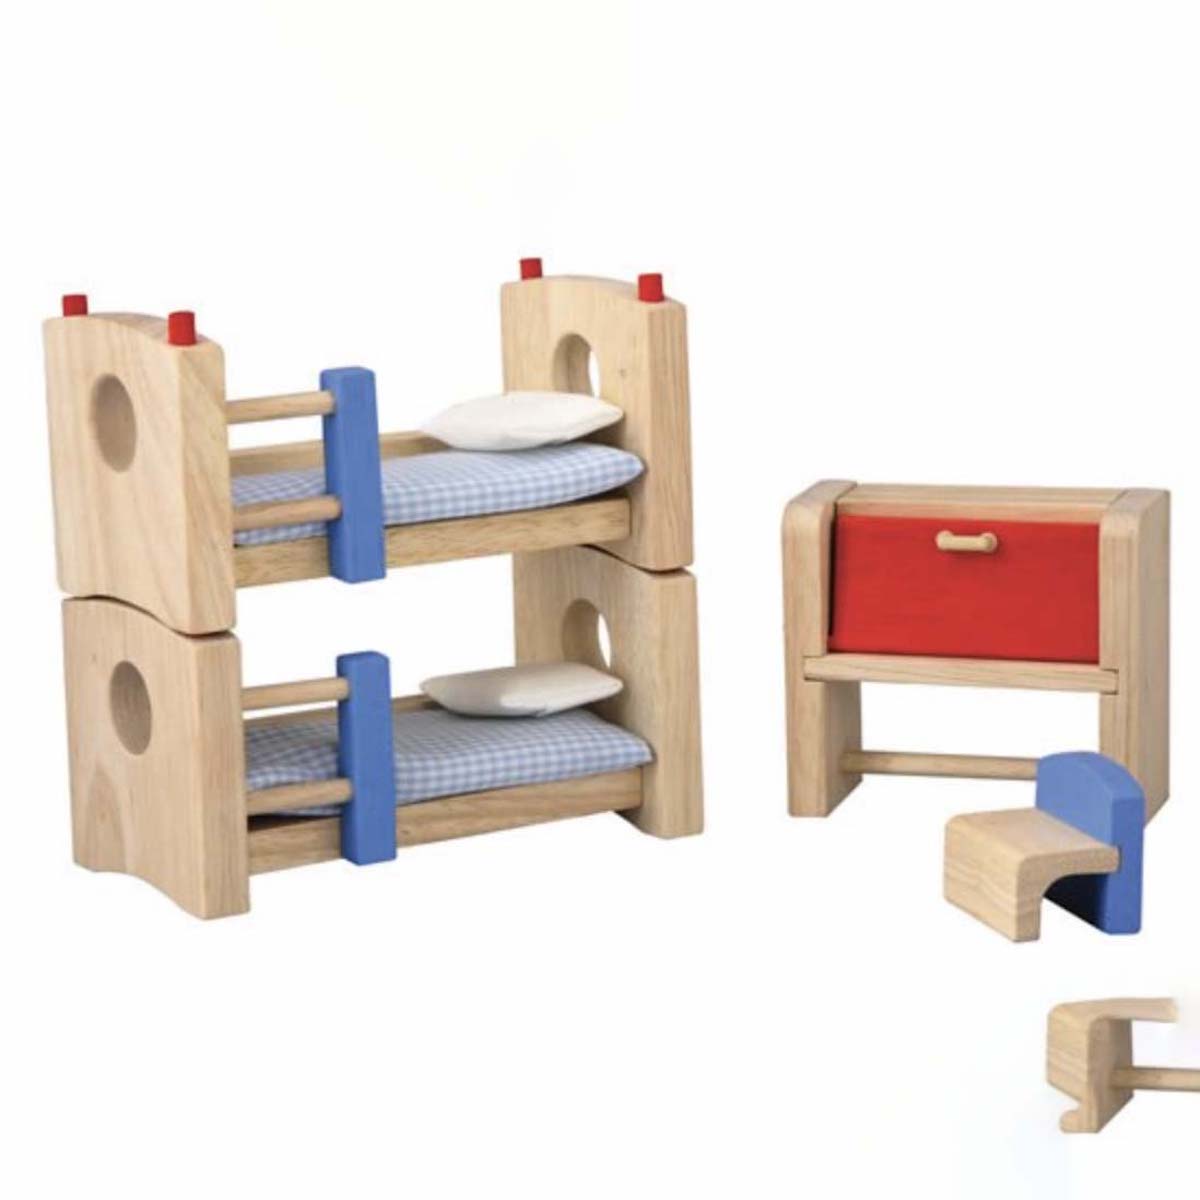 Plan Toys Children's Room House Furniture - Orchard Collection 7353